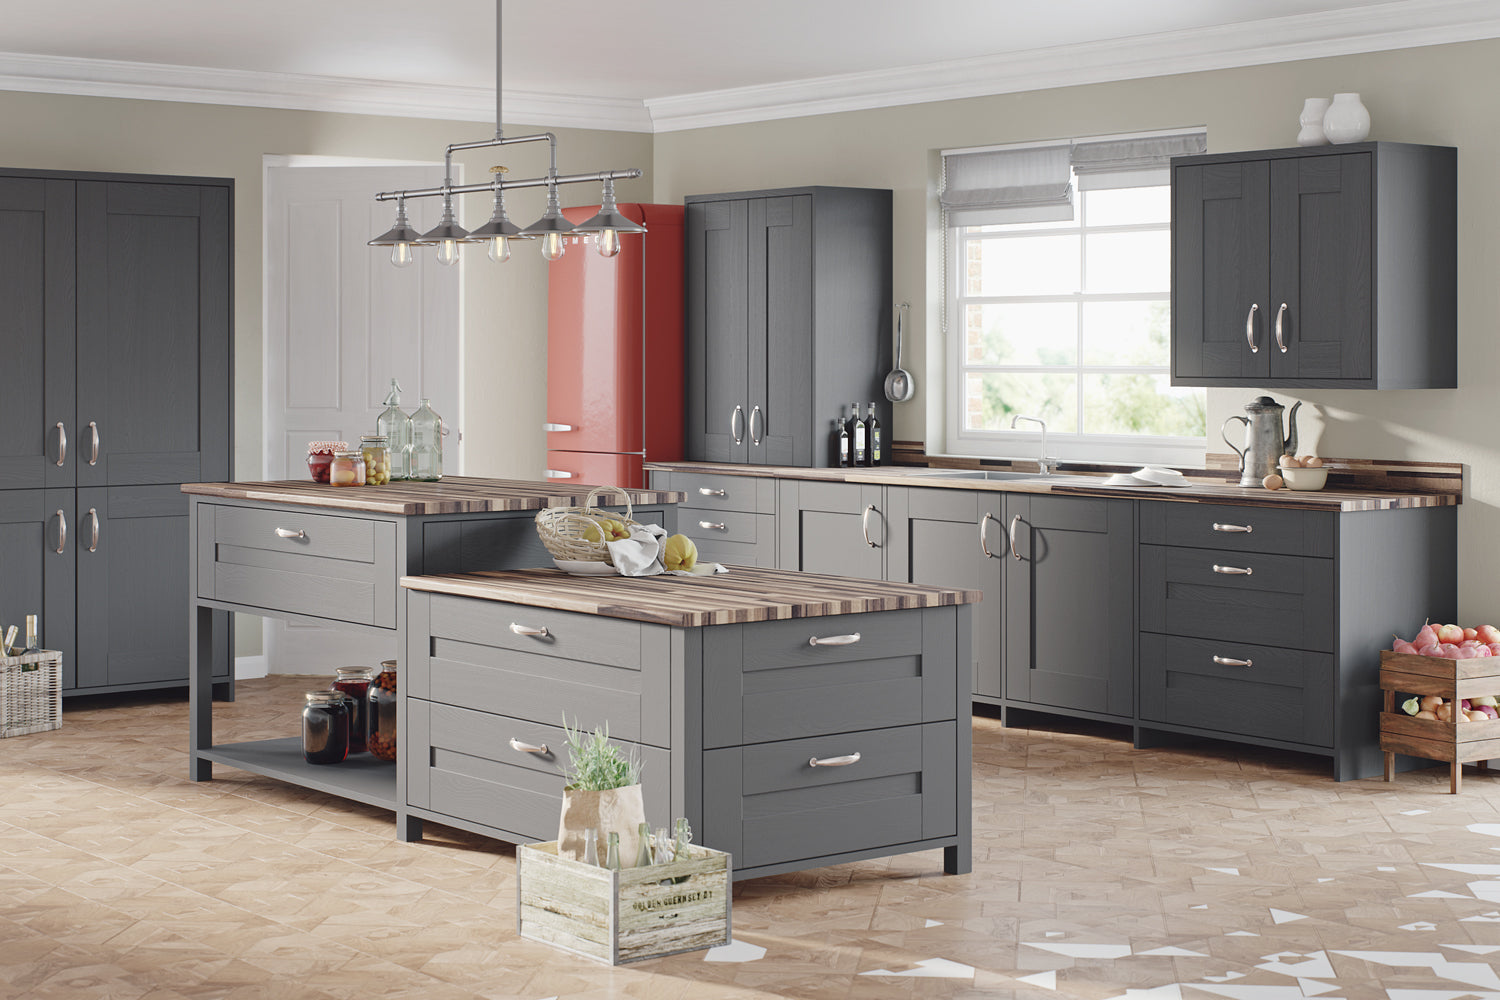 Modern kitchen with classic shaker style doors and drawers